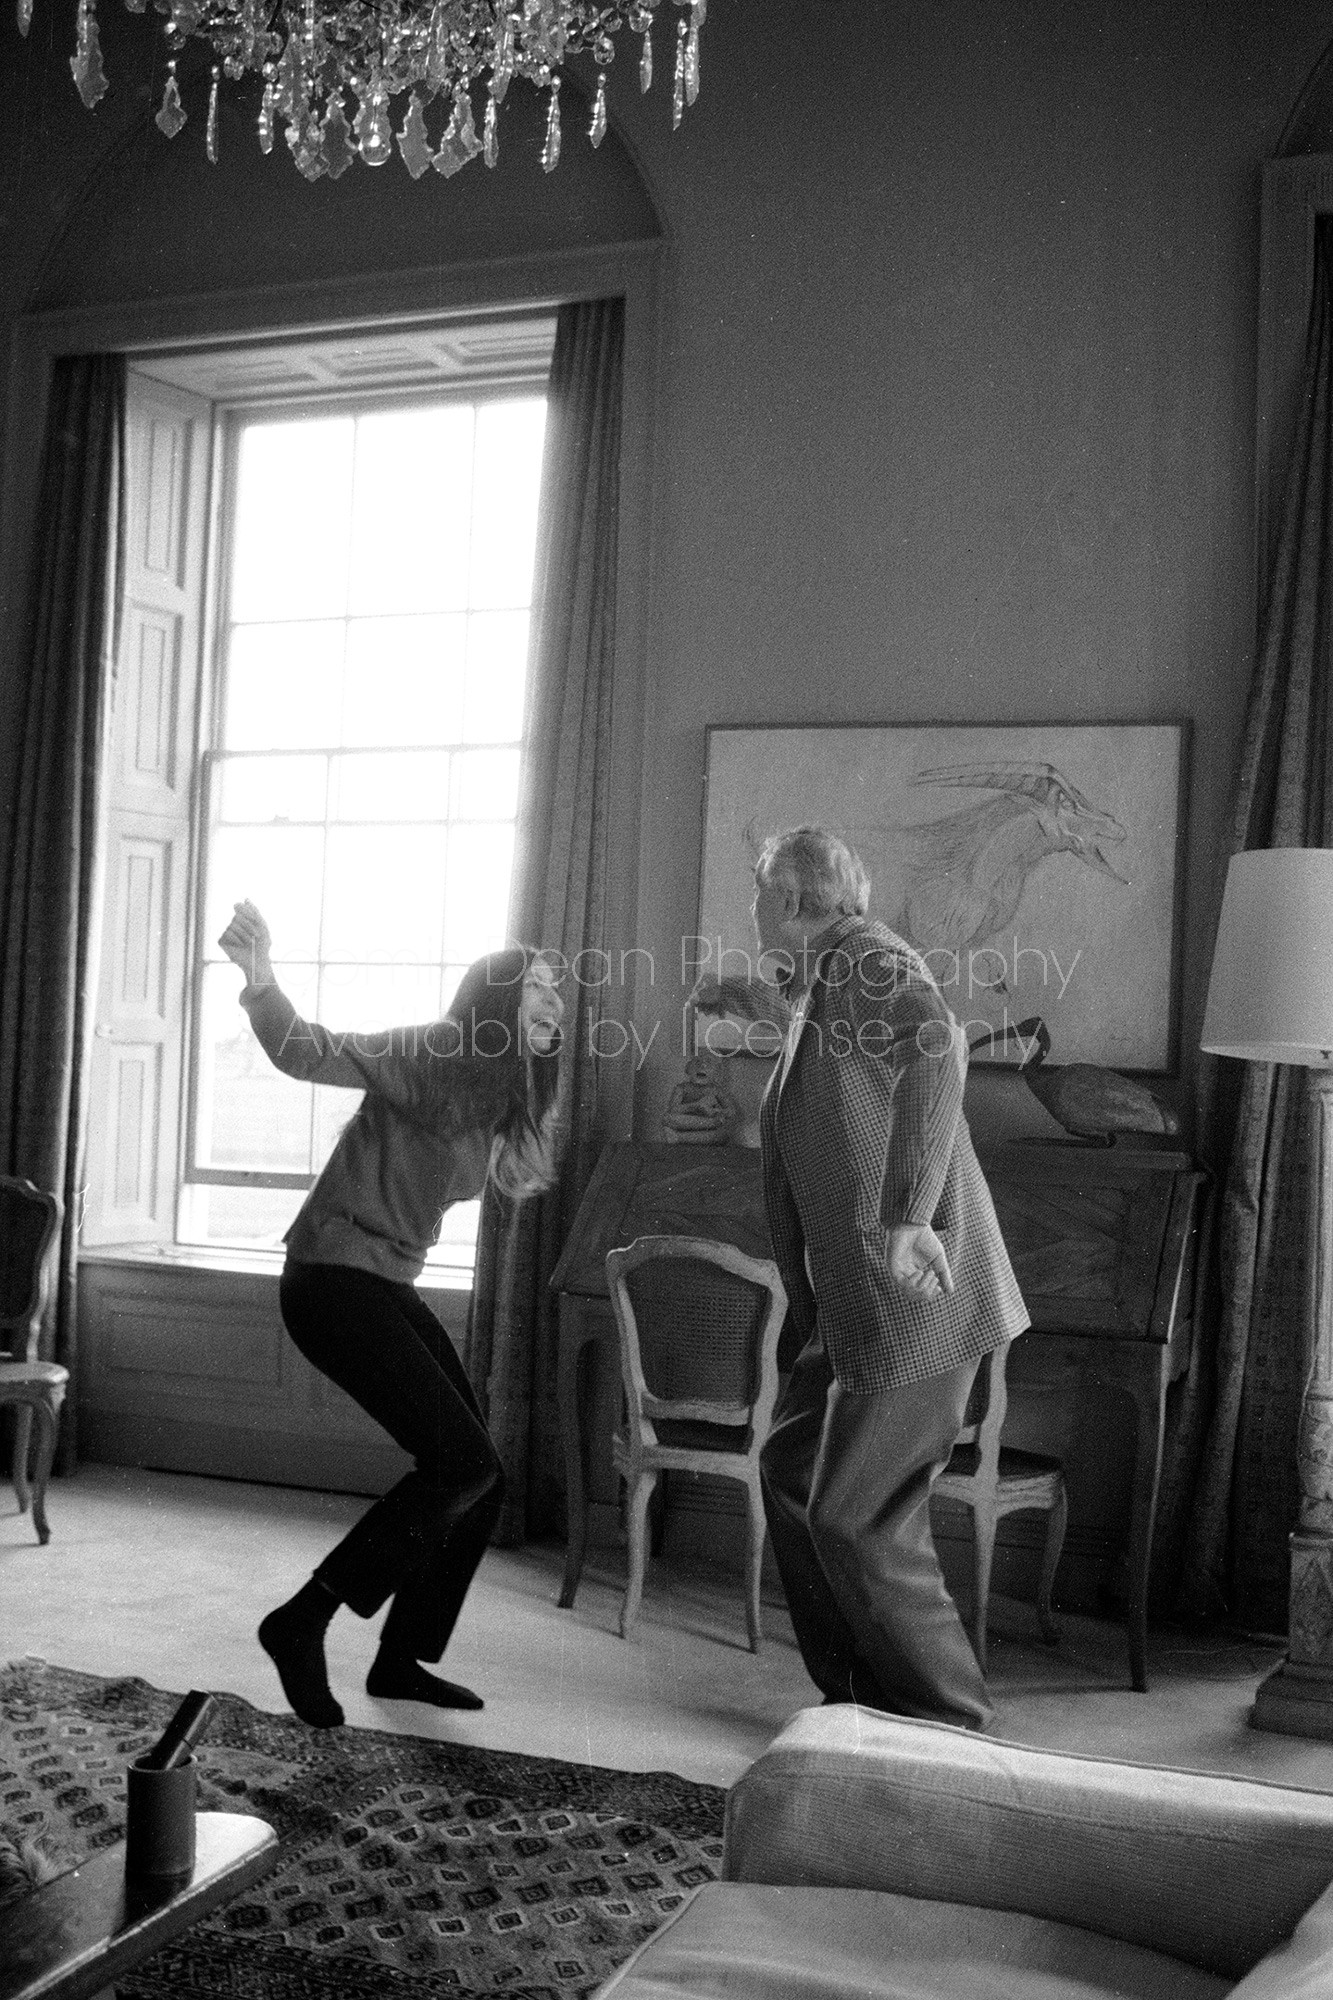 (L-R) Teenage actress Anjelica Huston dancing with her father, director John Huston, at their home.